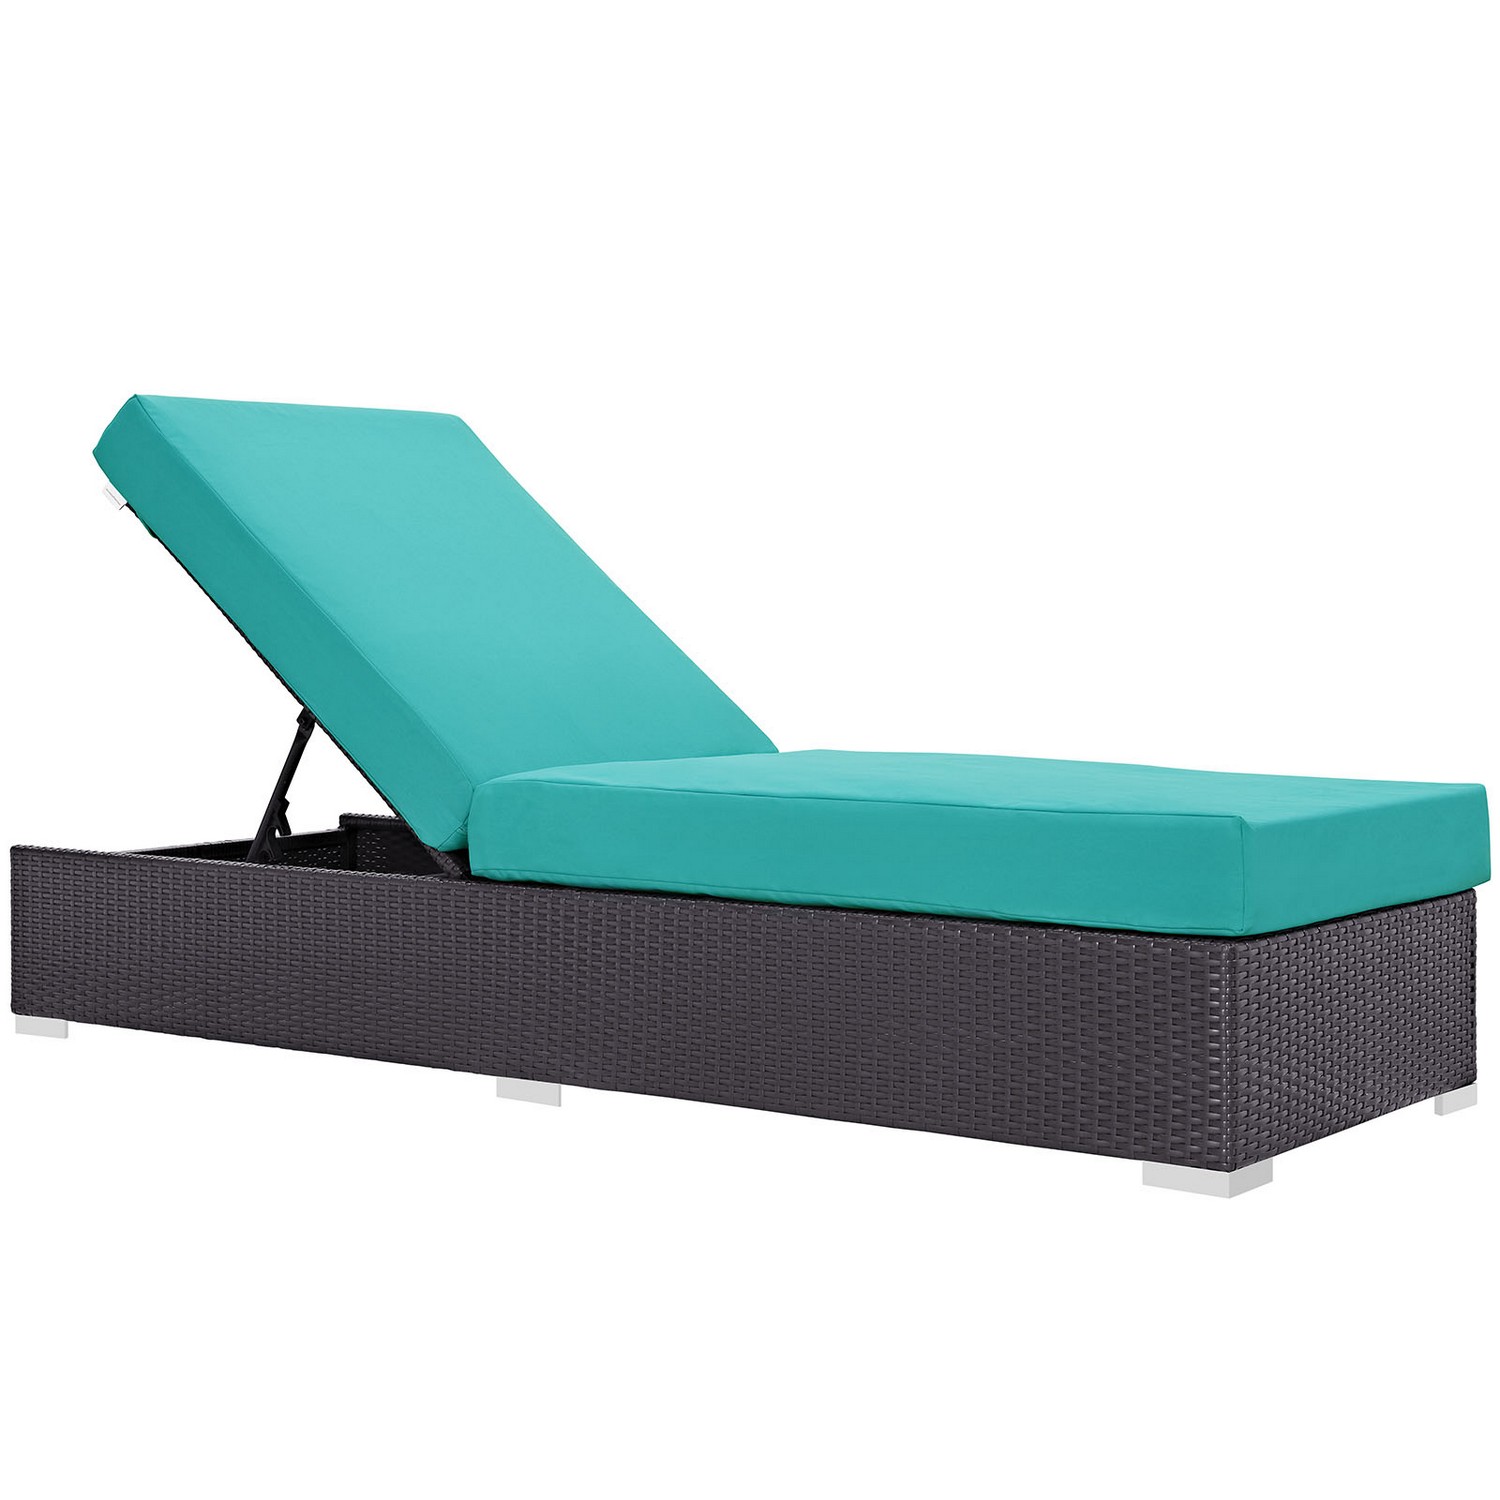 Modway Convene Outdoor Patio Chaise Lounge - Espresso Turquoise